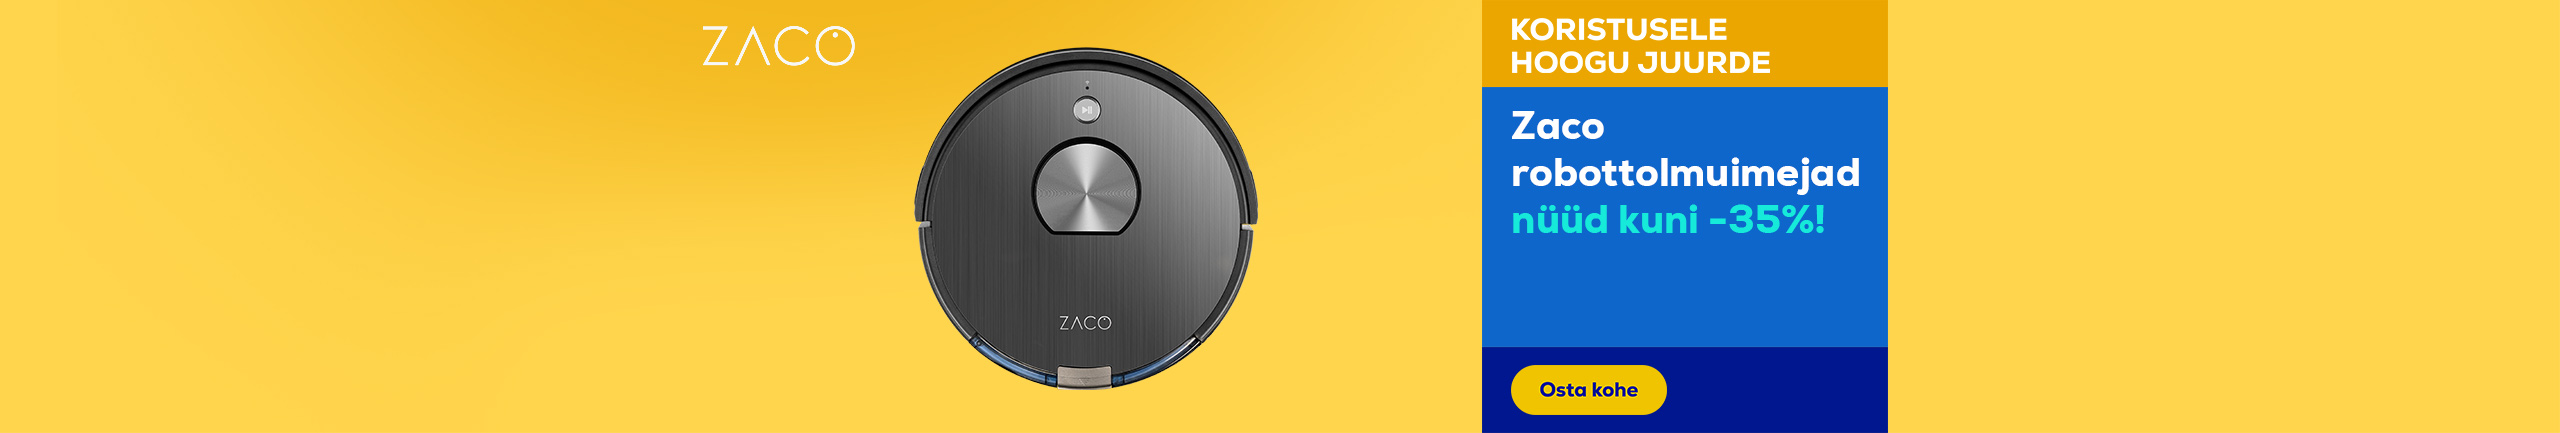 Zaco robotic vacuums now up to -35%!